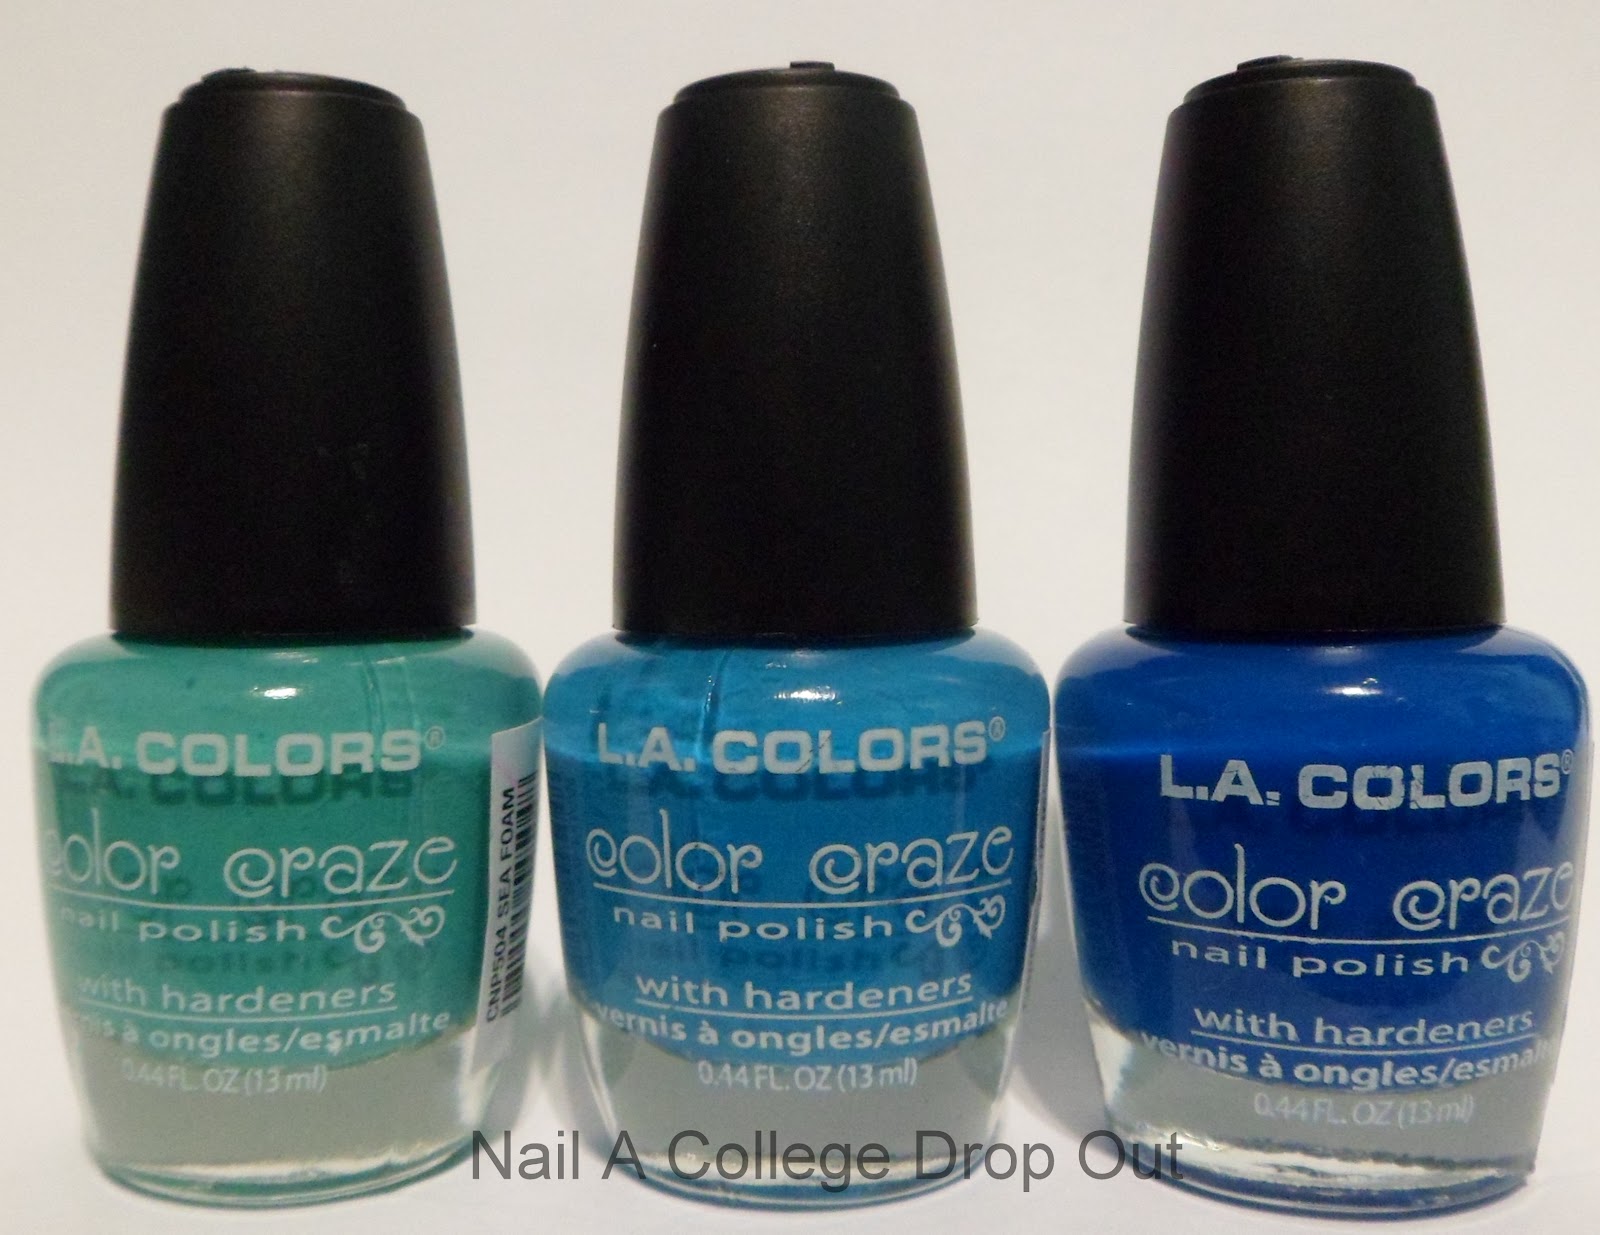 L.A. Colors Color Craze Nail Polish, 371 - Wired - wide 4